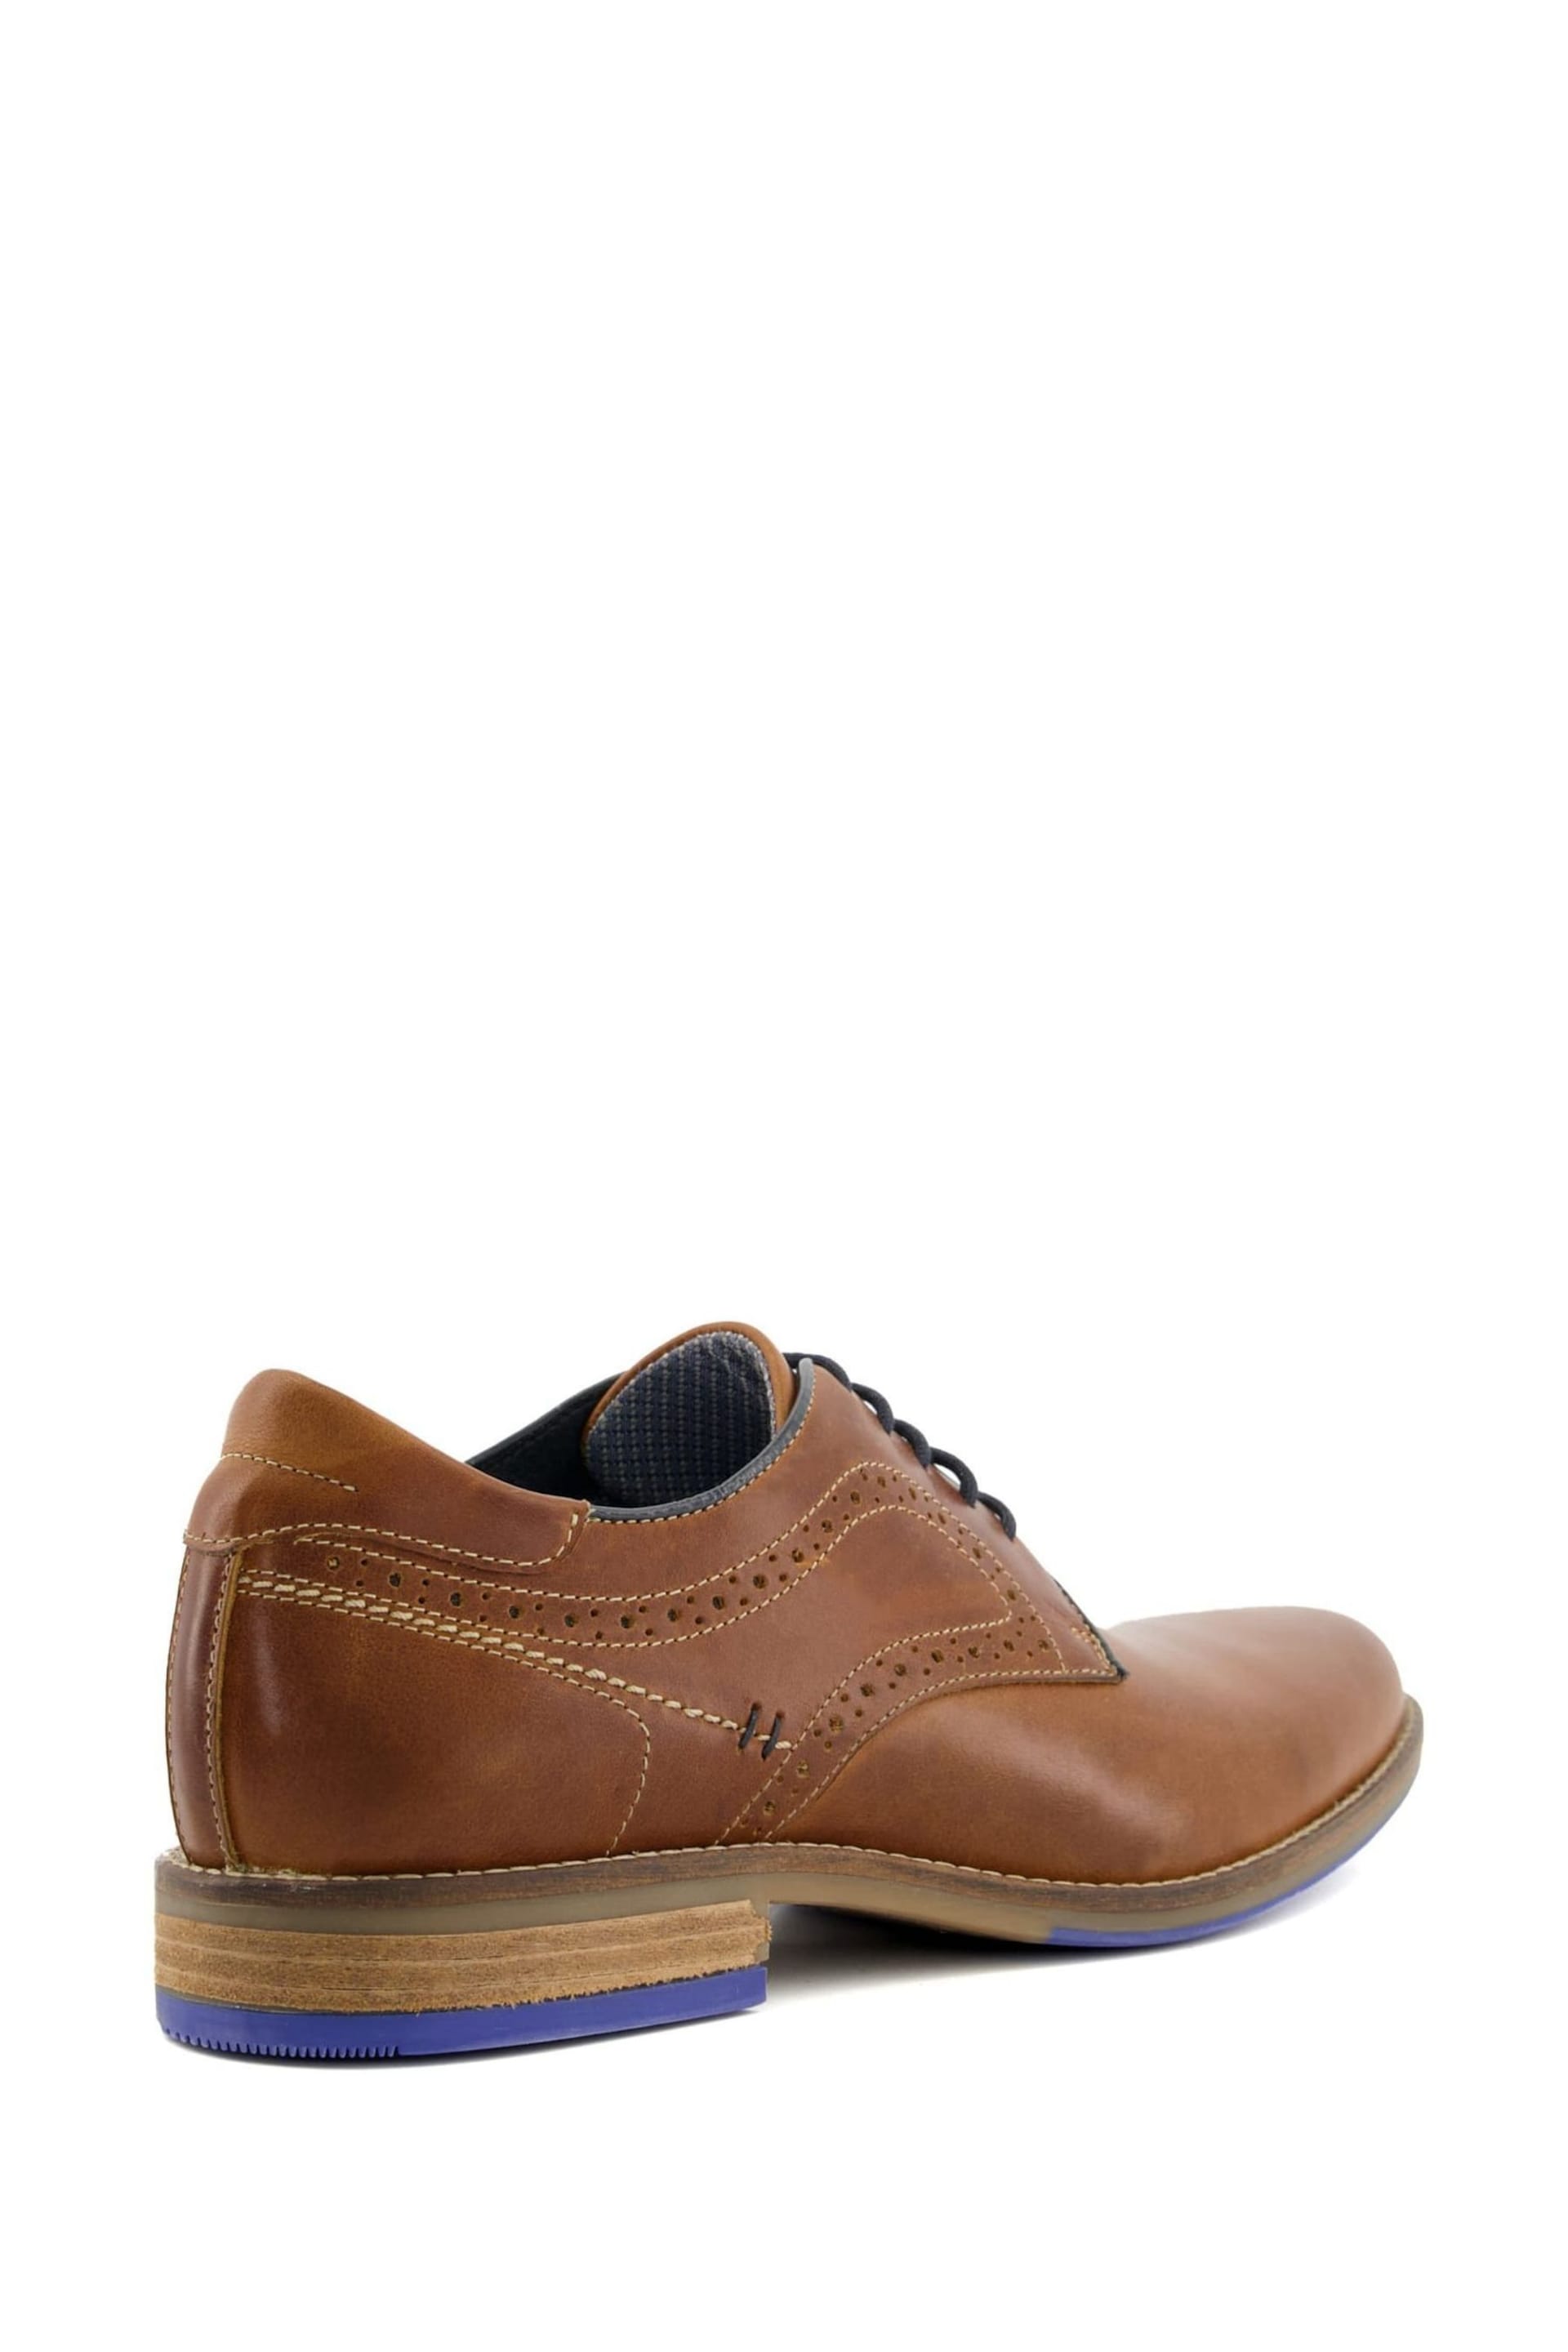 Dune London Brown Bintom Piped Derby Shoes - Image 5 of 6